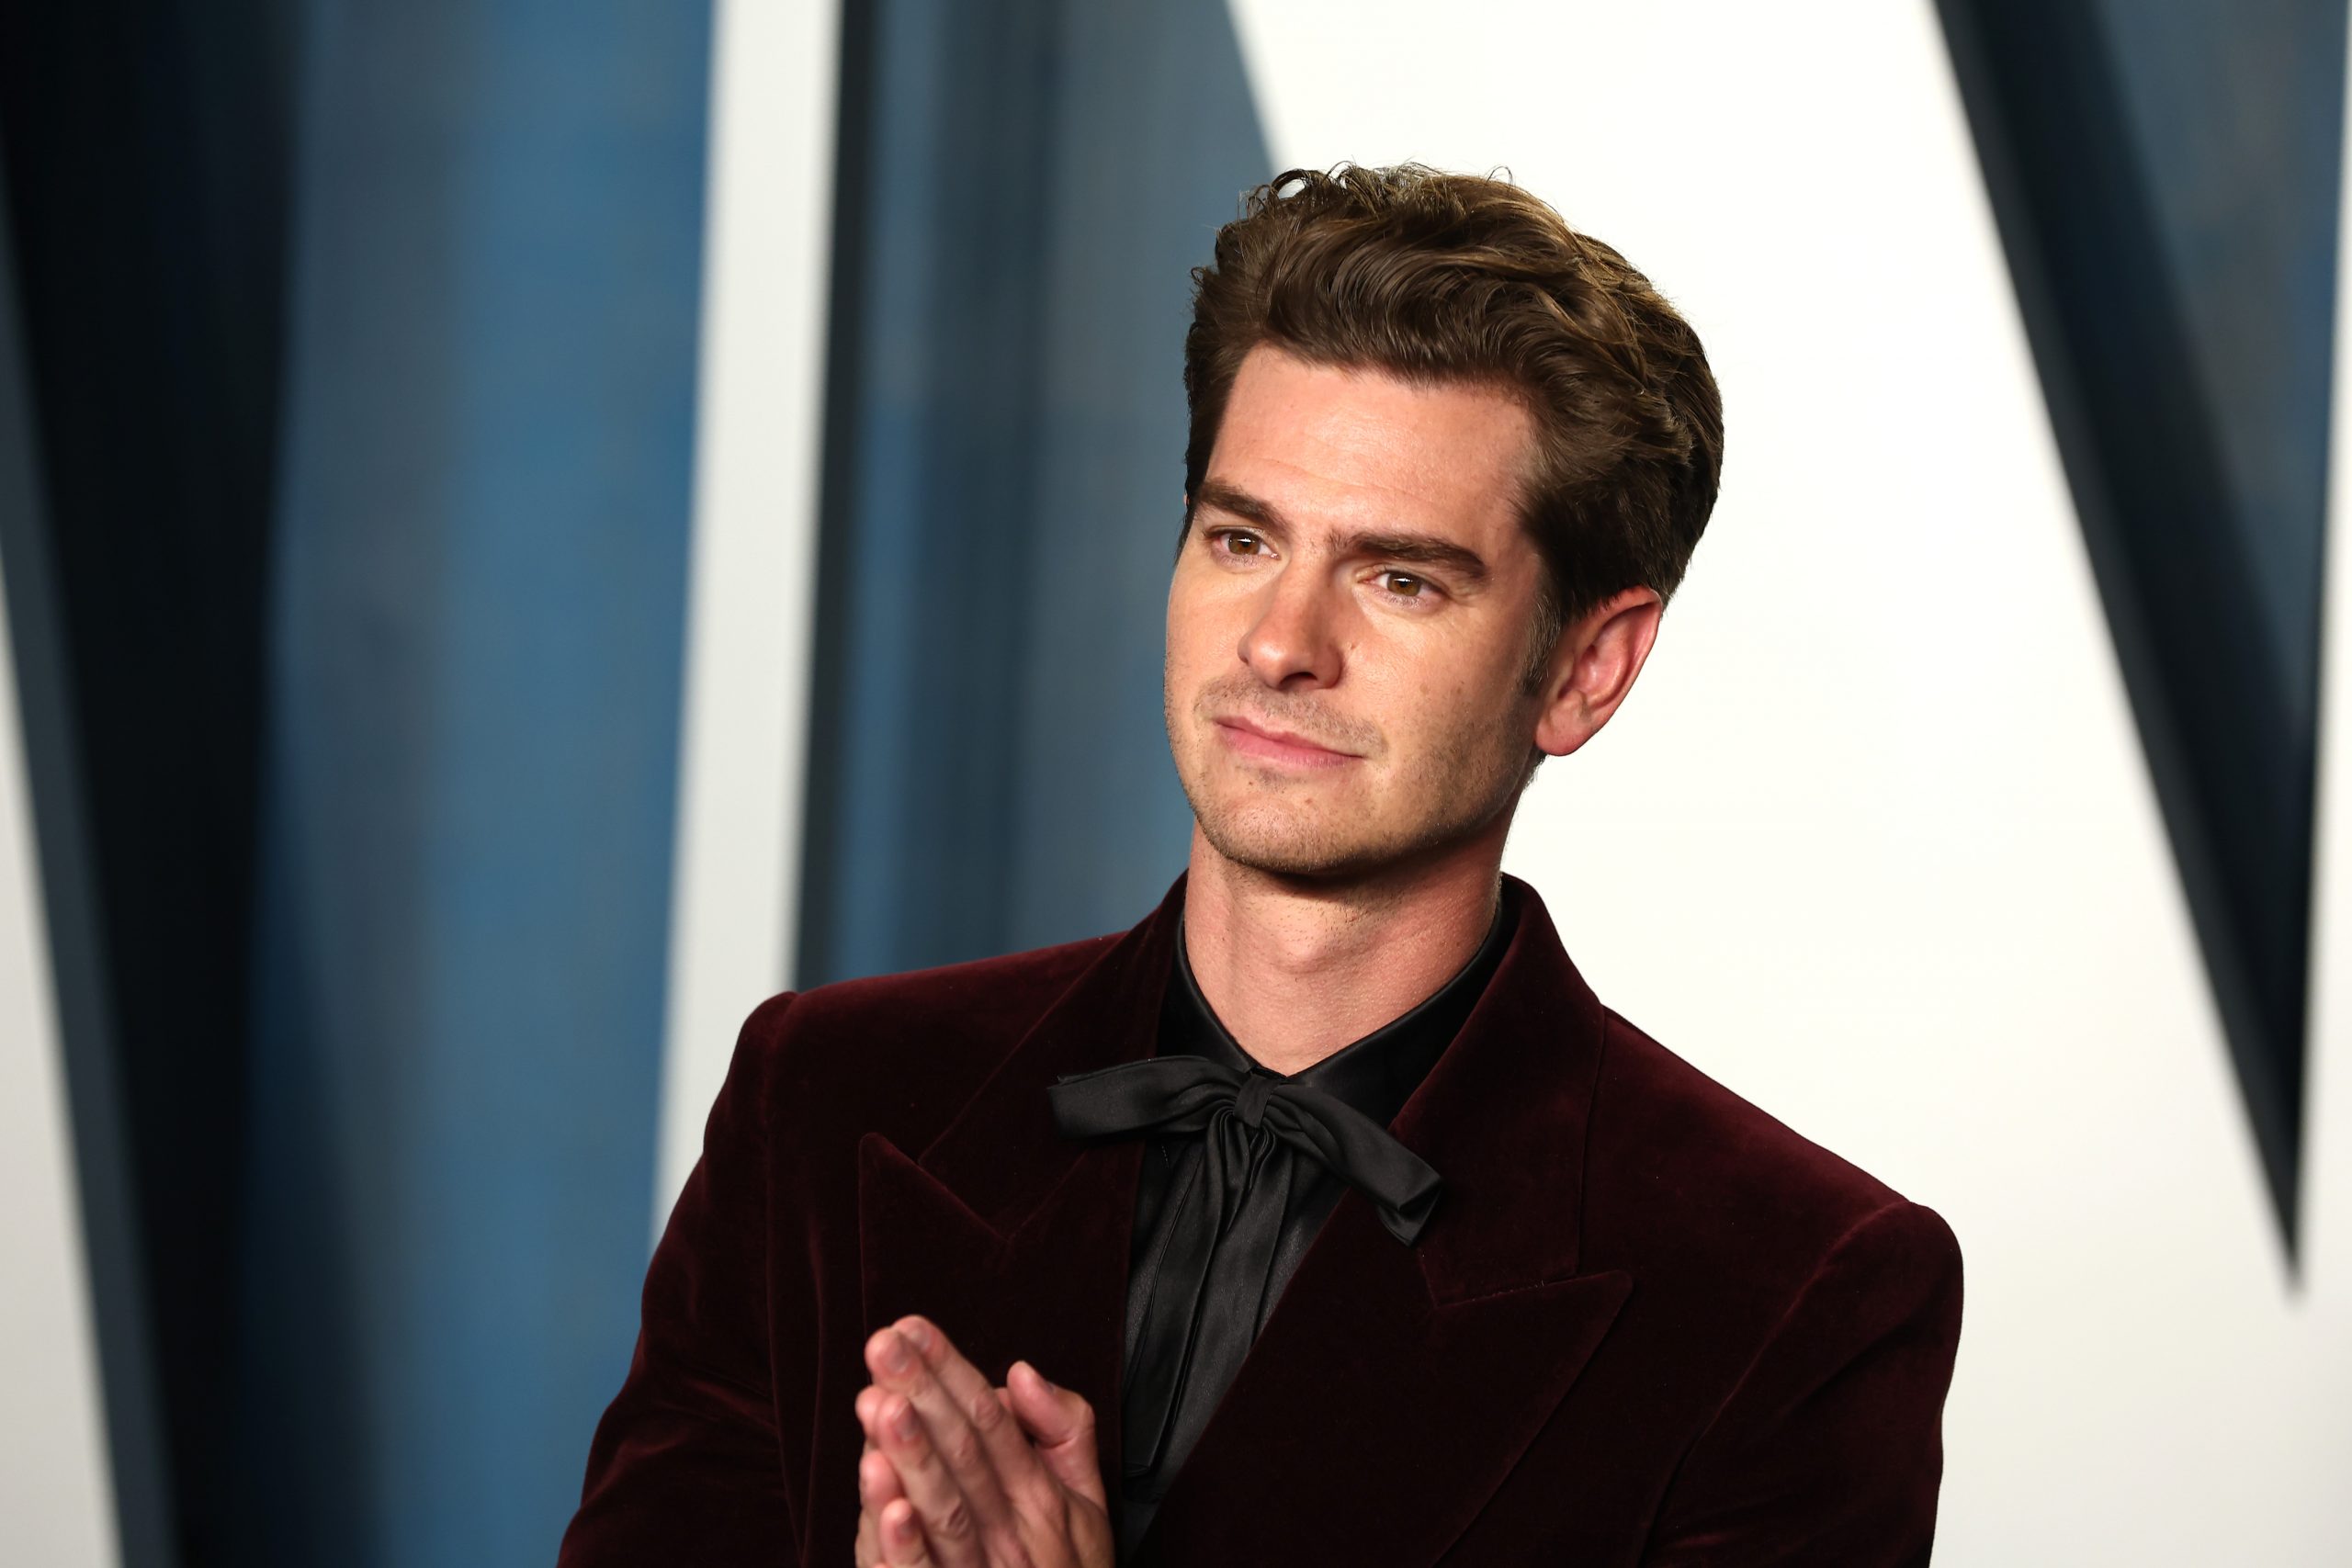 Andrew Garfield Was ‘Desperate’ to Join Disney’s ‘Narnia’ Movies